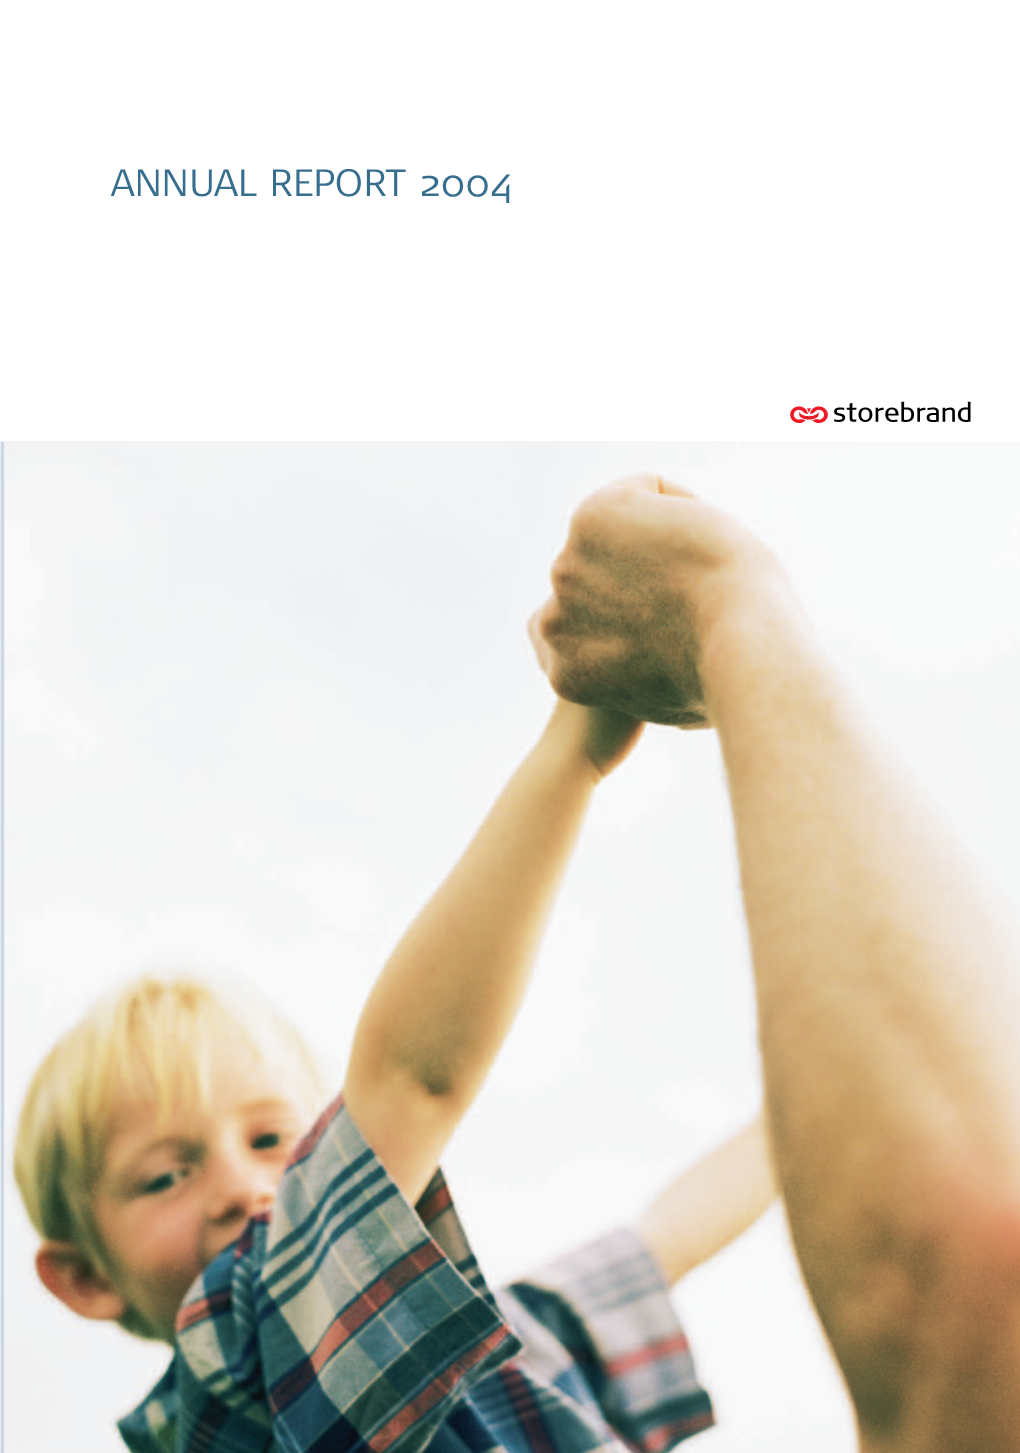 ANNUAL REPORT 2004 Respected Institution in the Norwegian Market for Long-Term Savings and Life Insurance